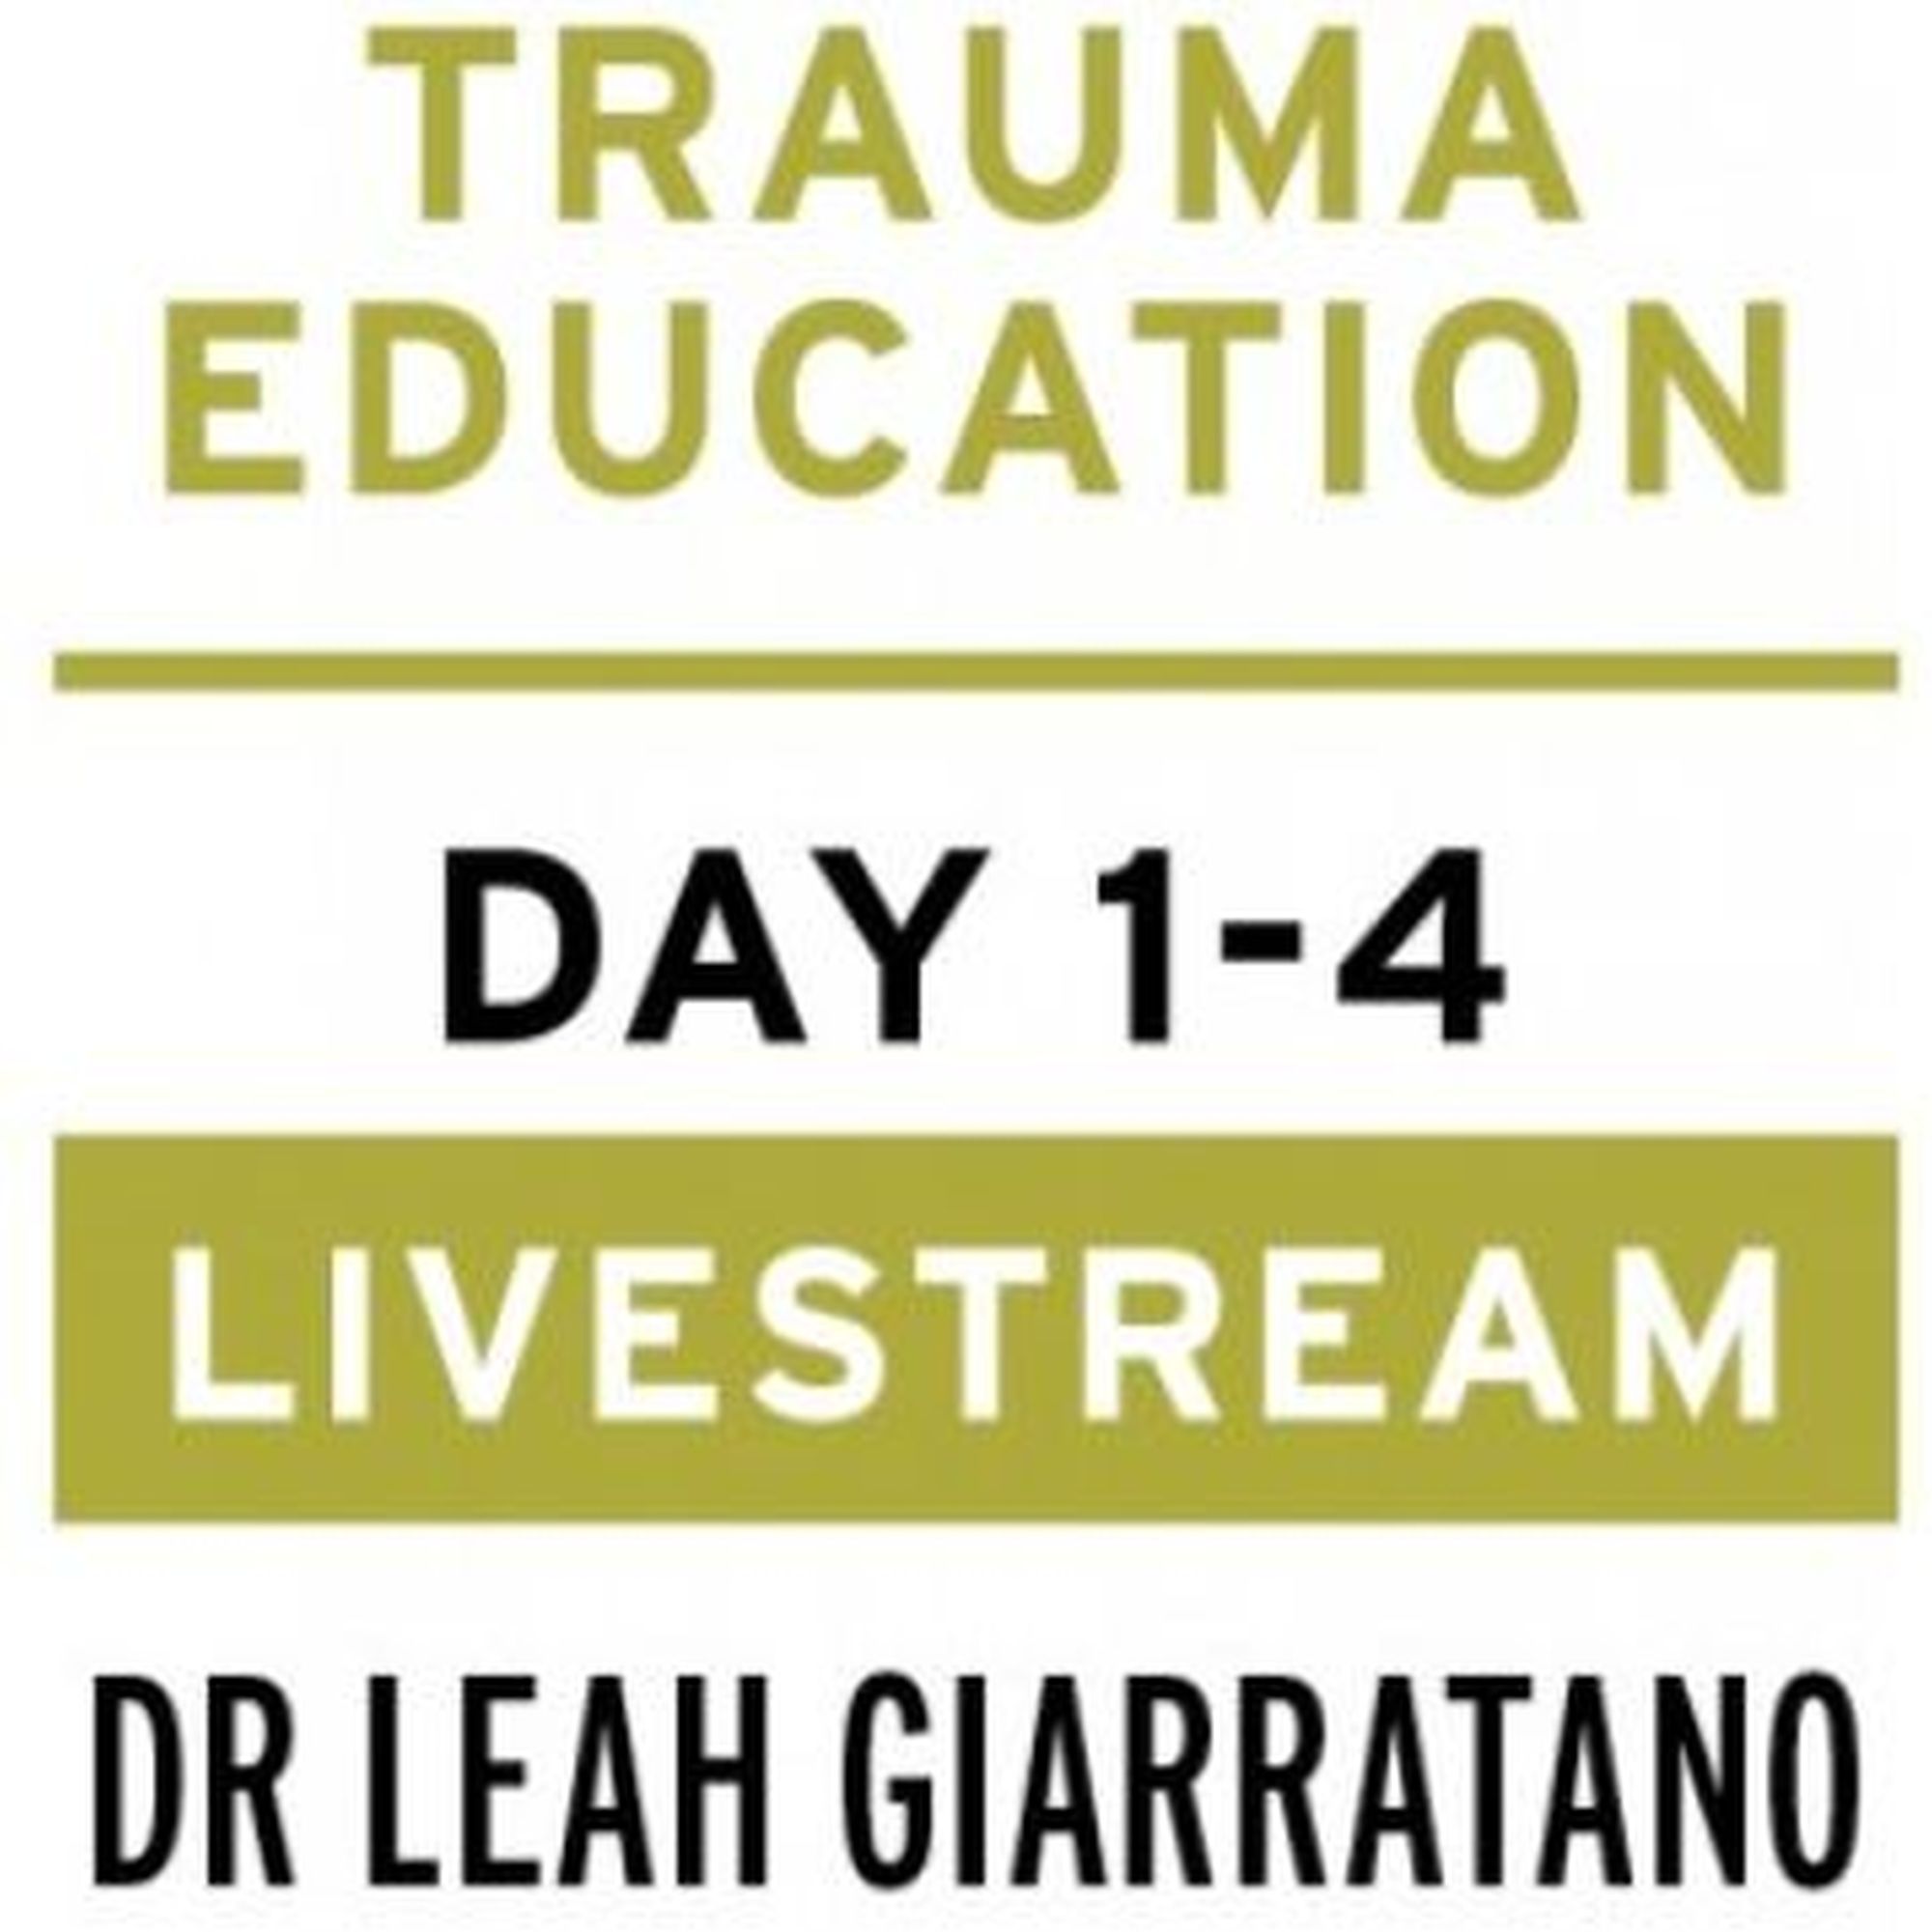 Treating PTSD + Complex Trauma with Dr Leah Giarratano 21-22 and 28-29 September 2023 Livestream - Aberdeen